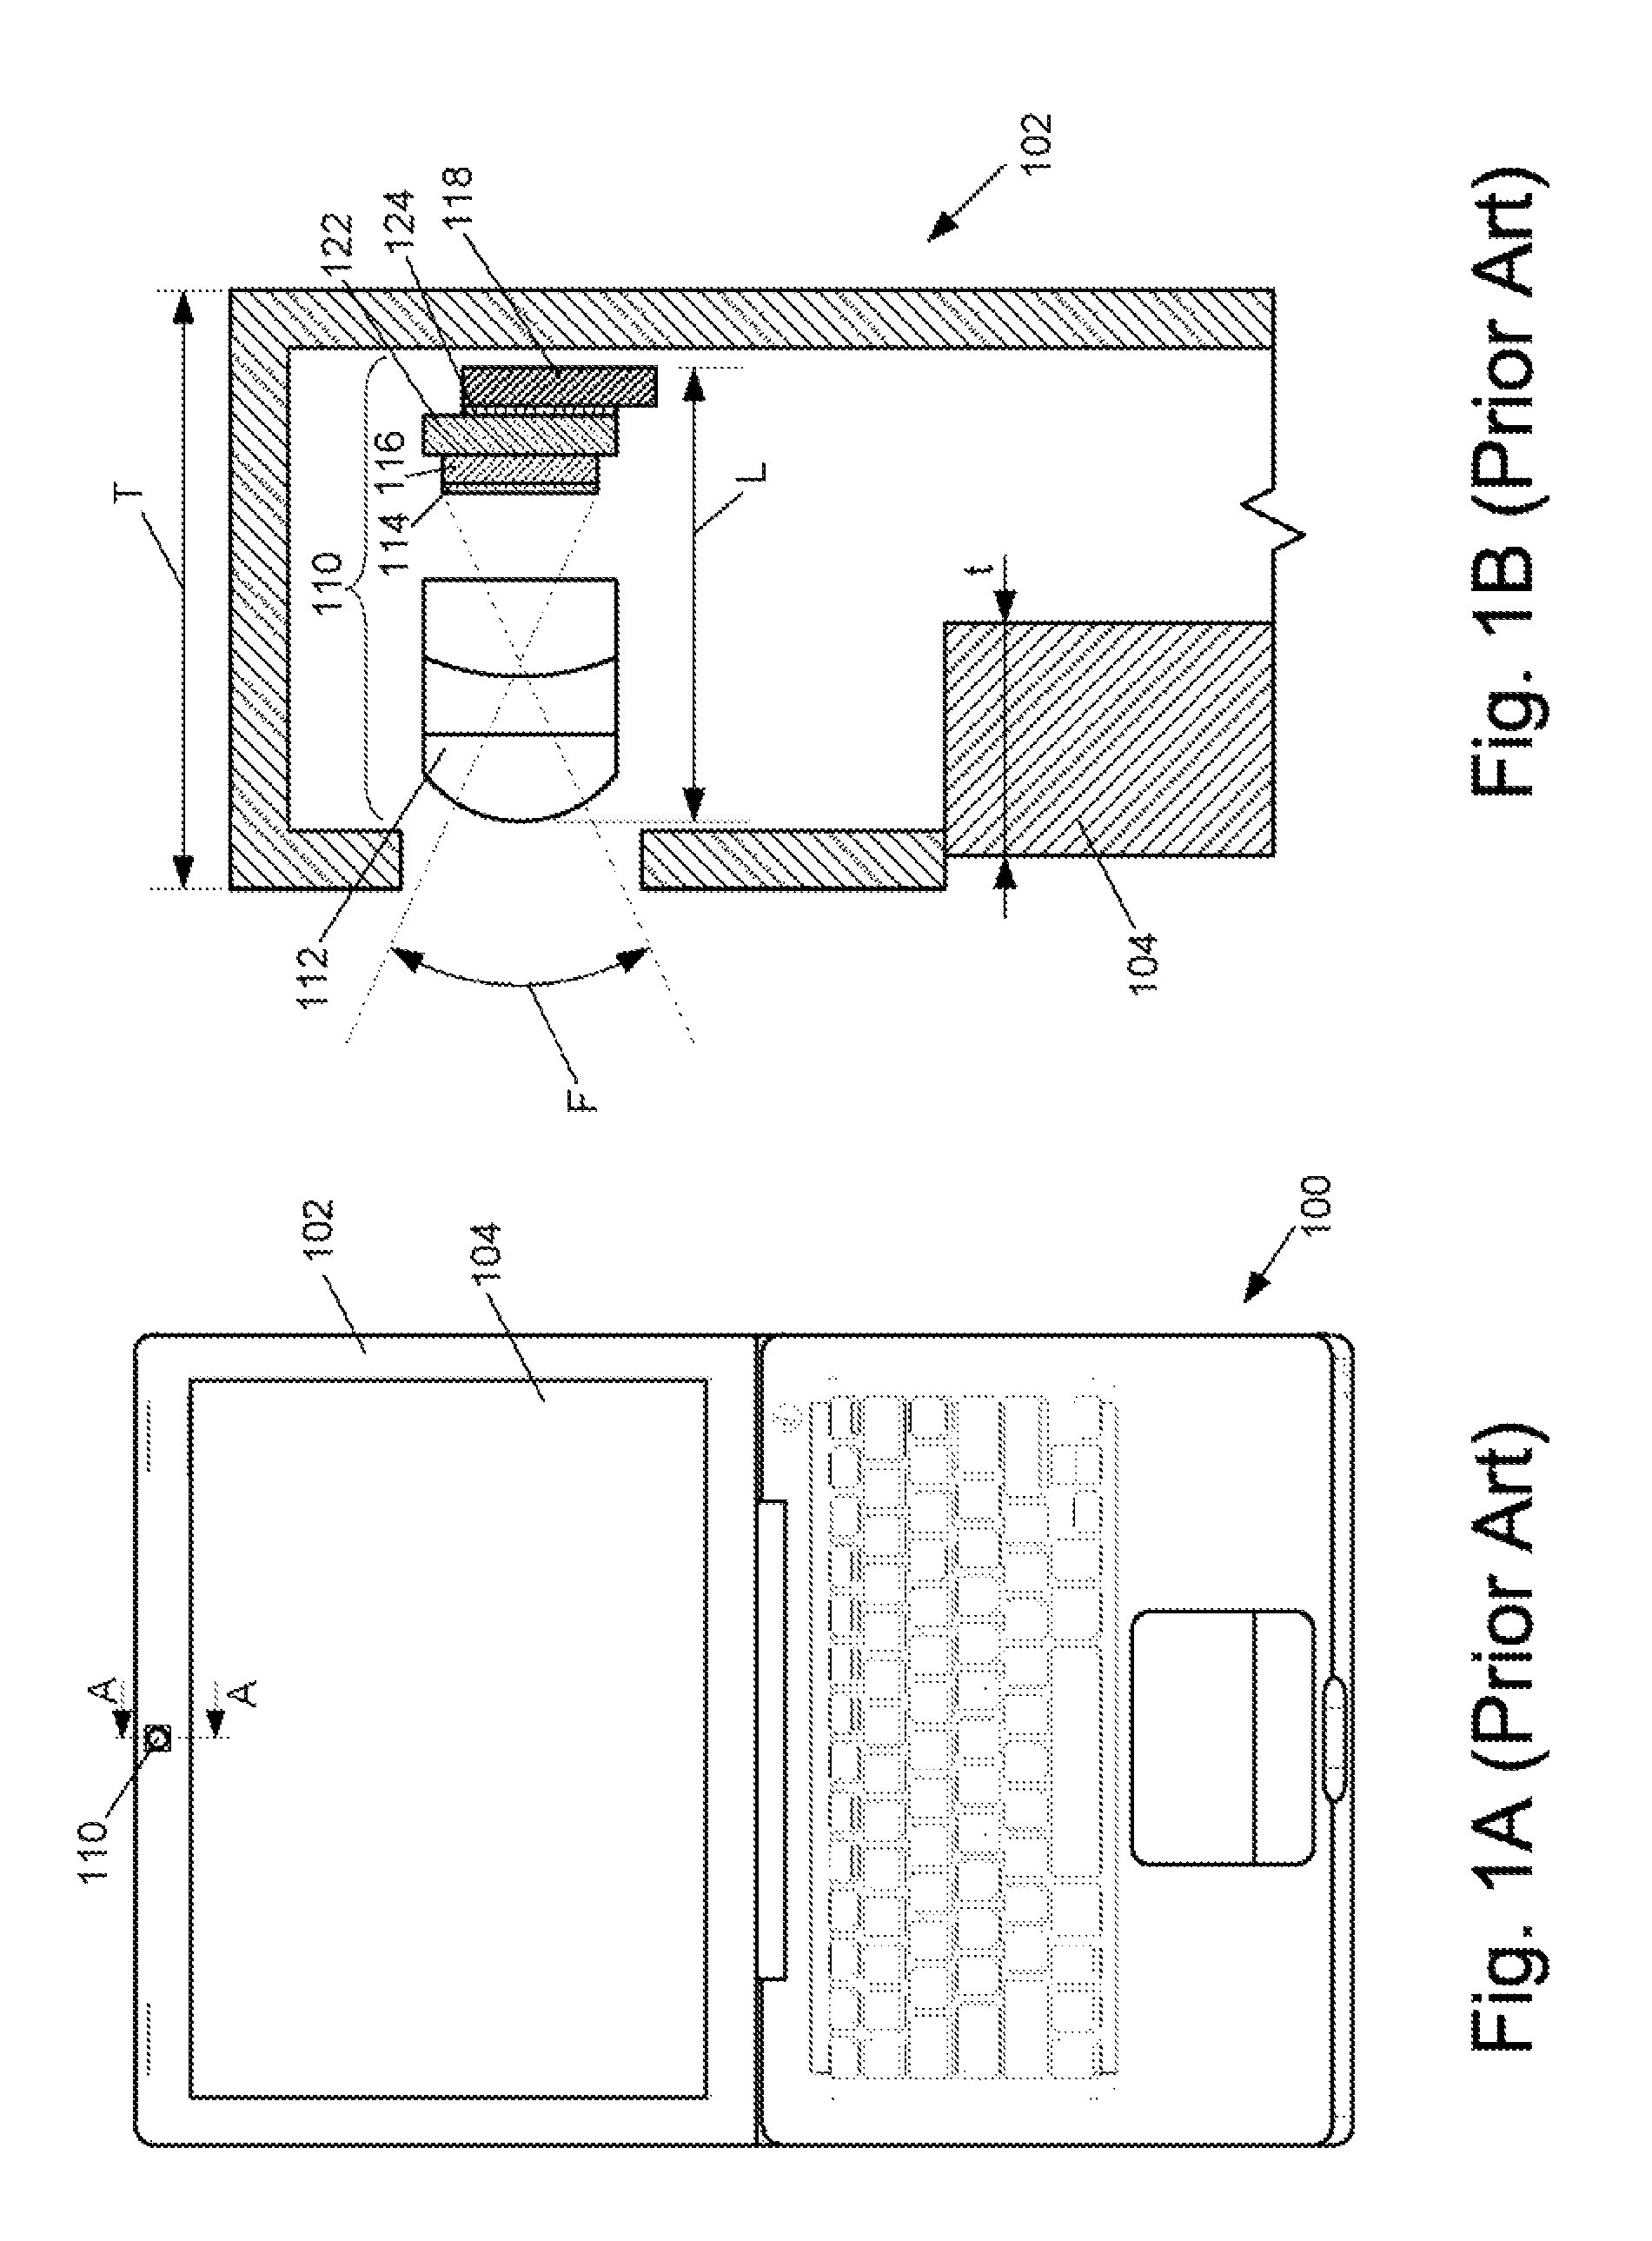 Electronic device with two image sensors